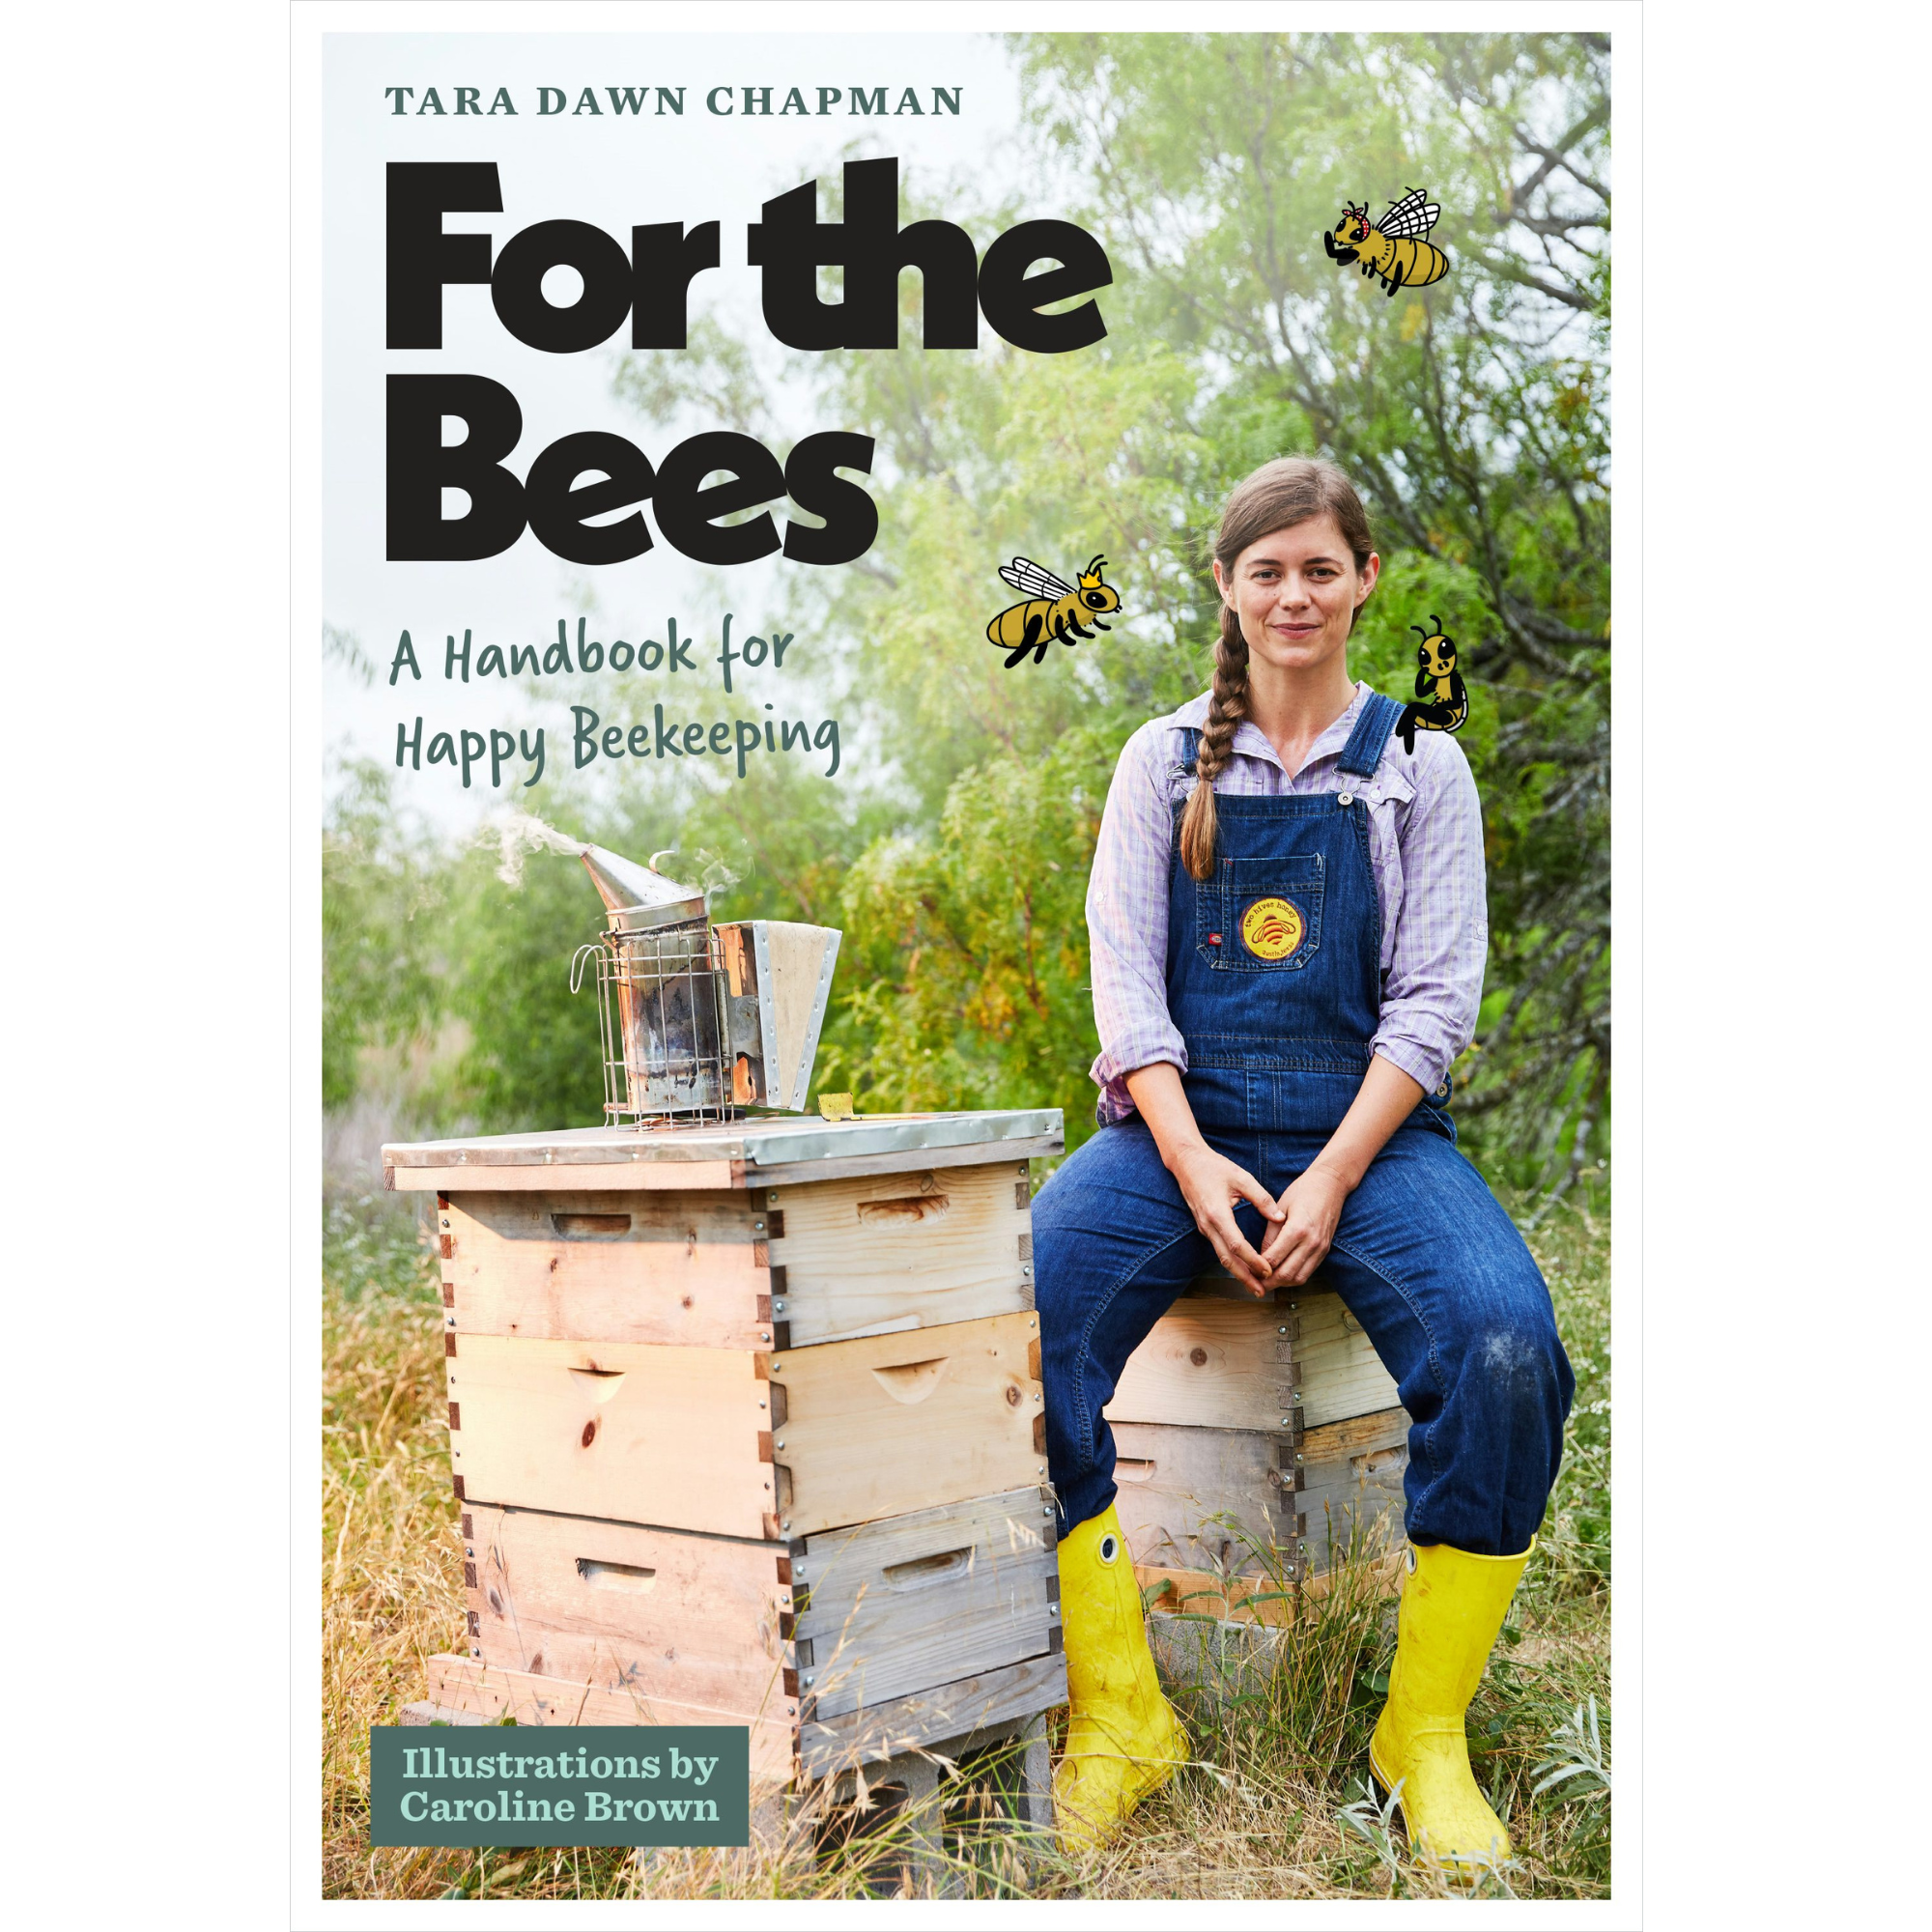 A book entitled "For the Bees: A Guide to Happy Beekeeping."